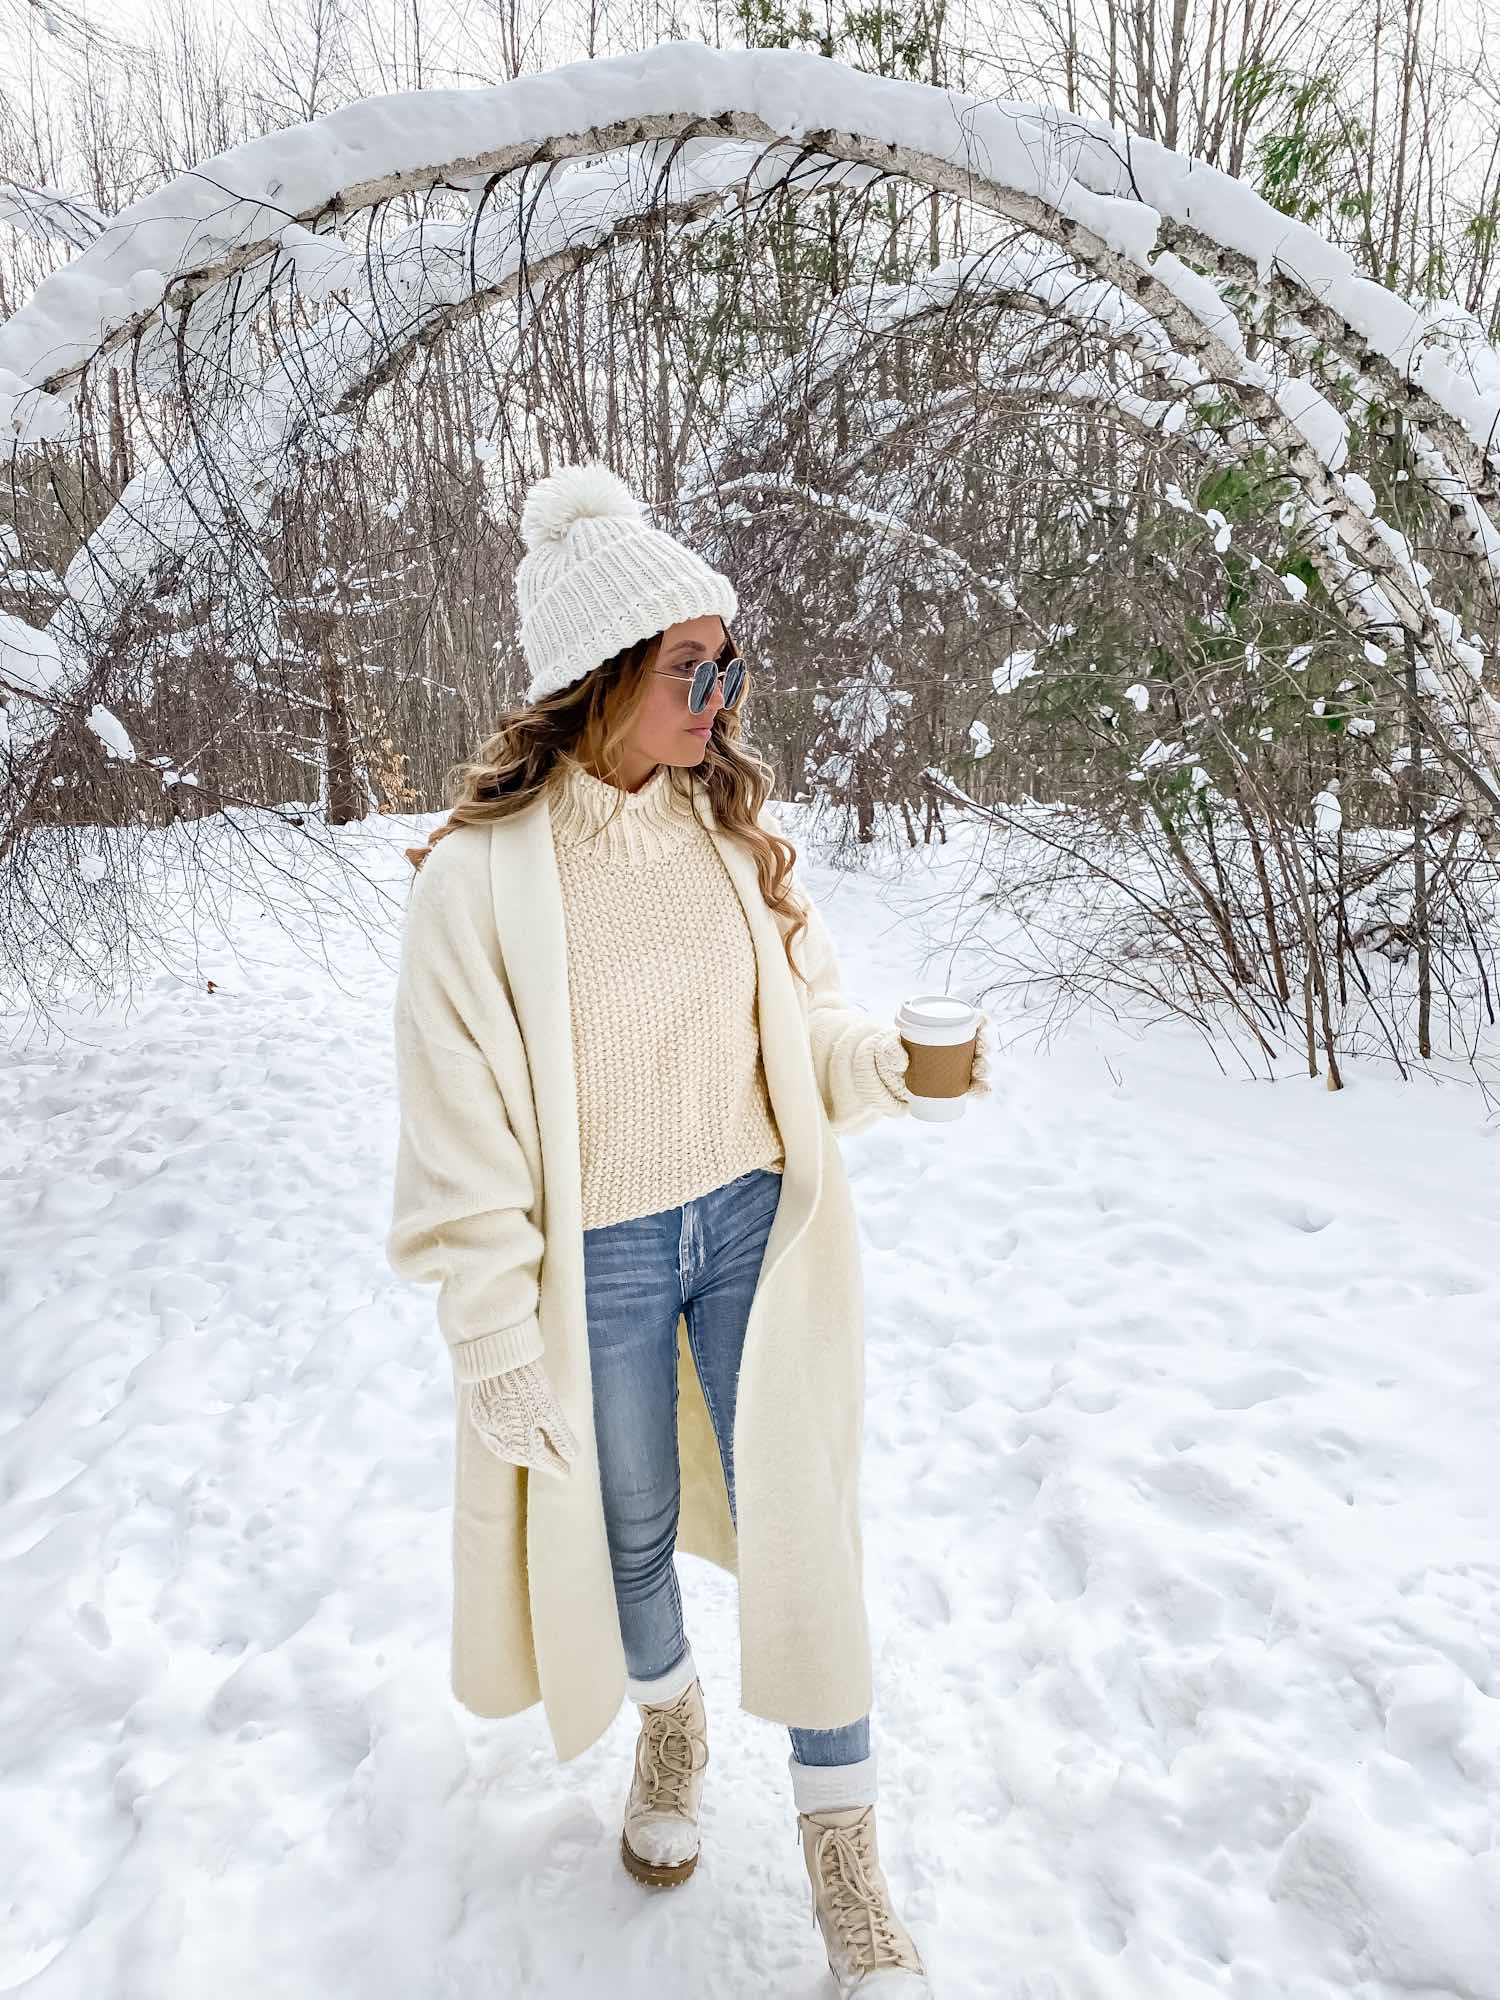 Cute Winter Outfit Ideas To Nail That Cozy Chic Look This Season